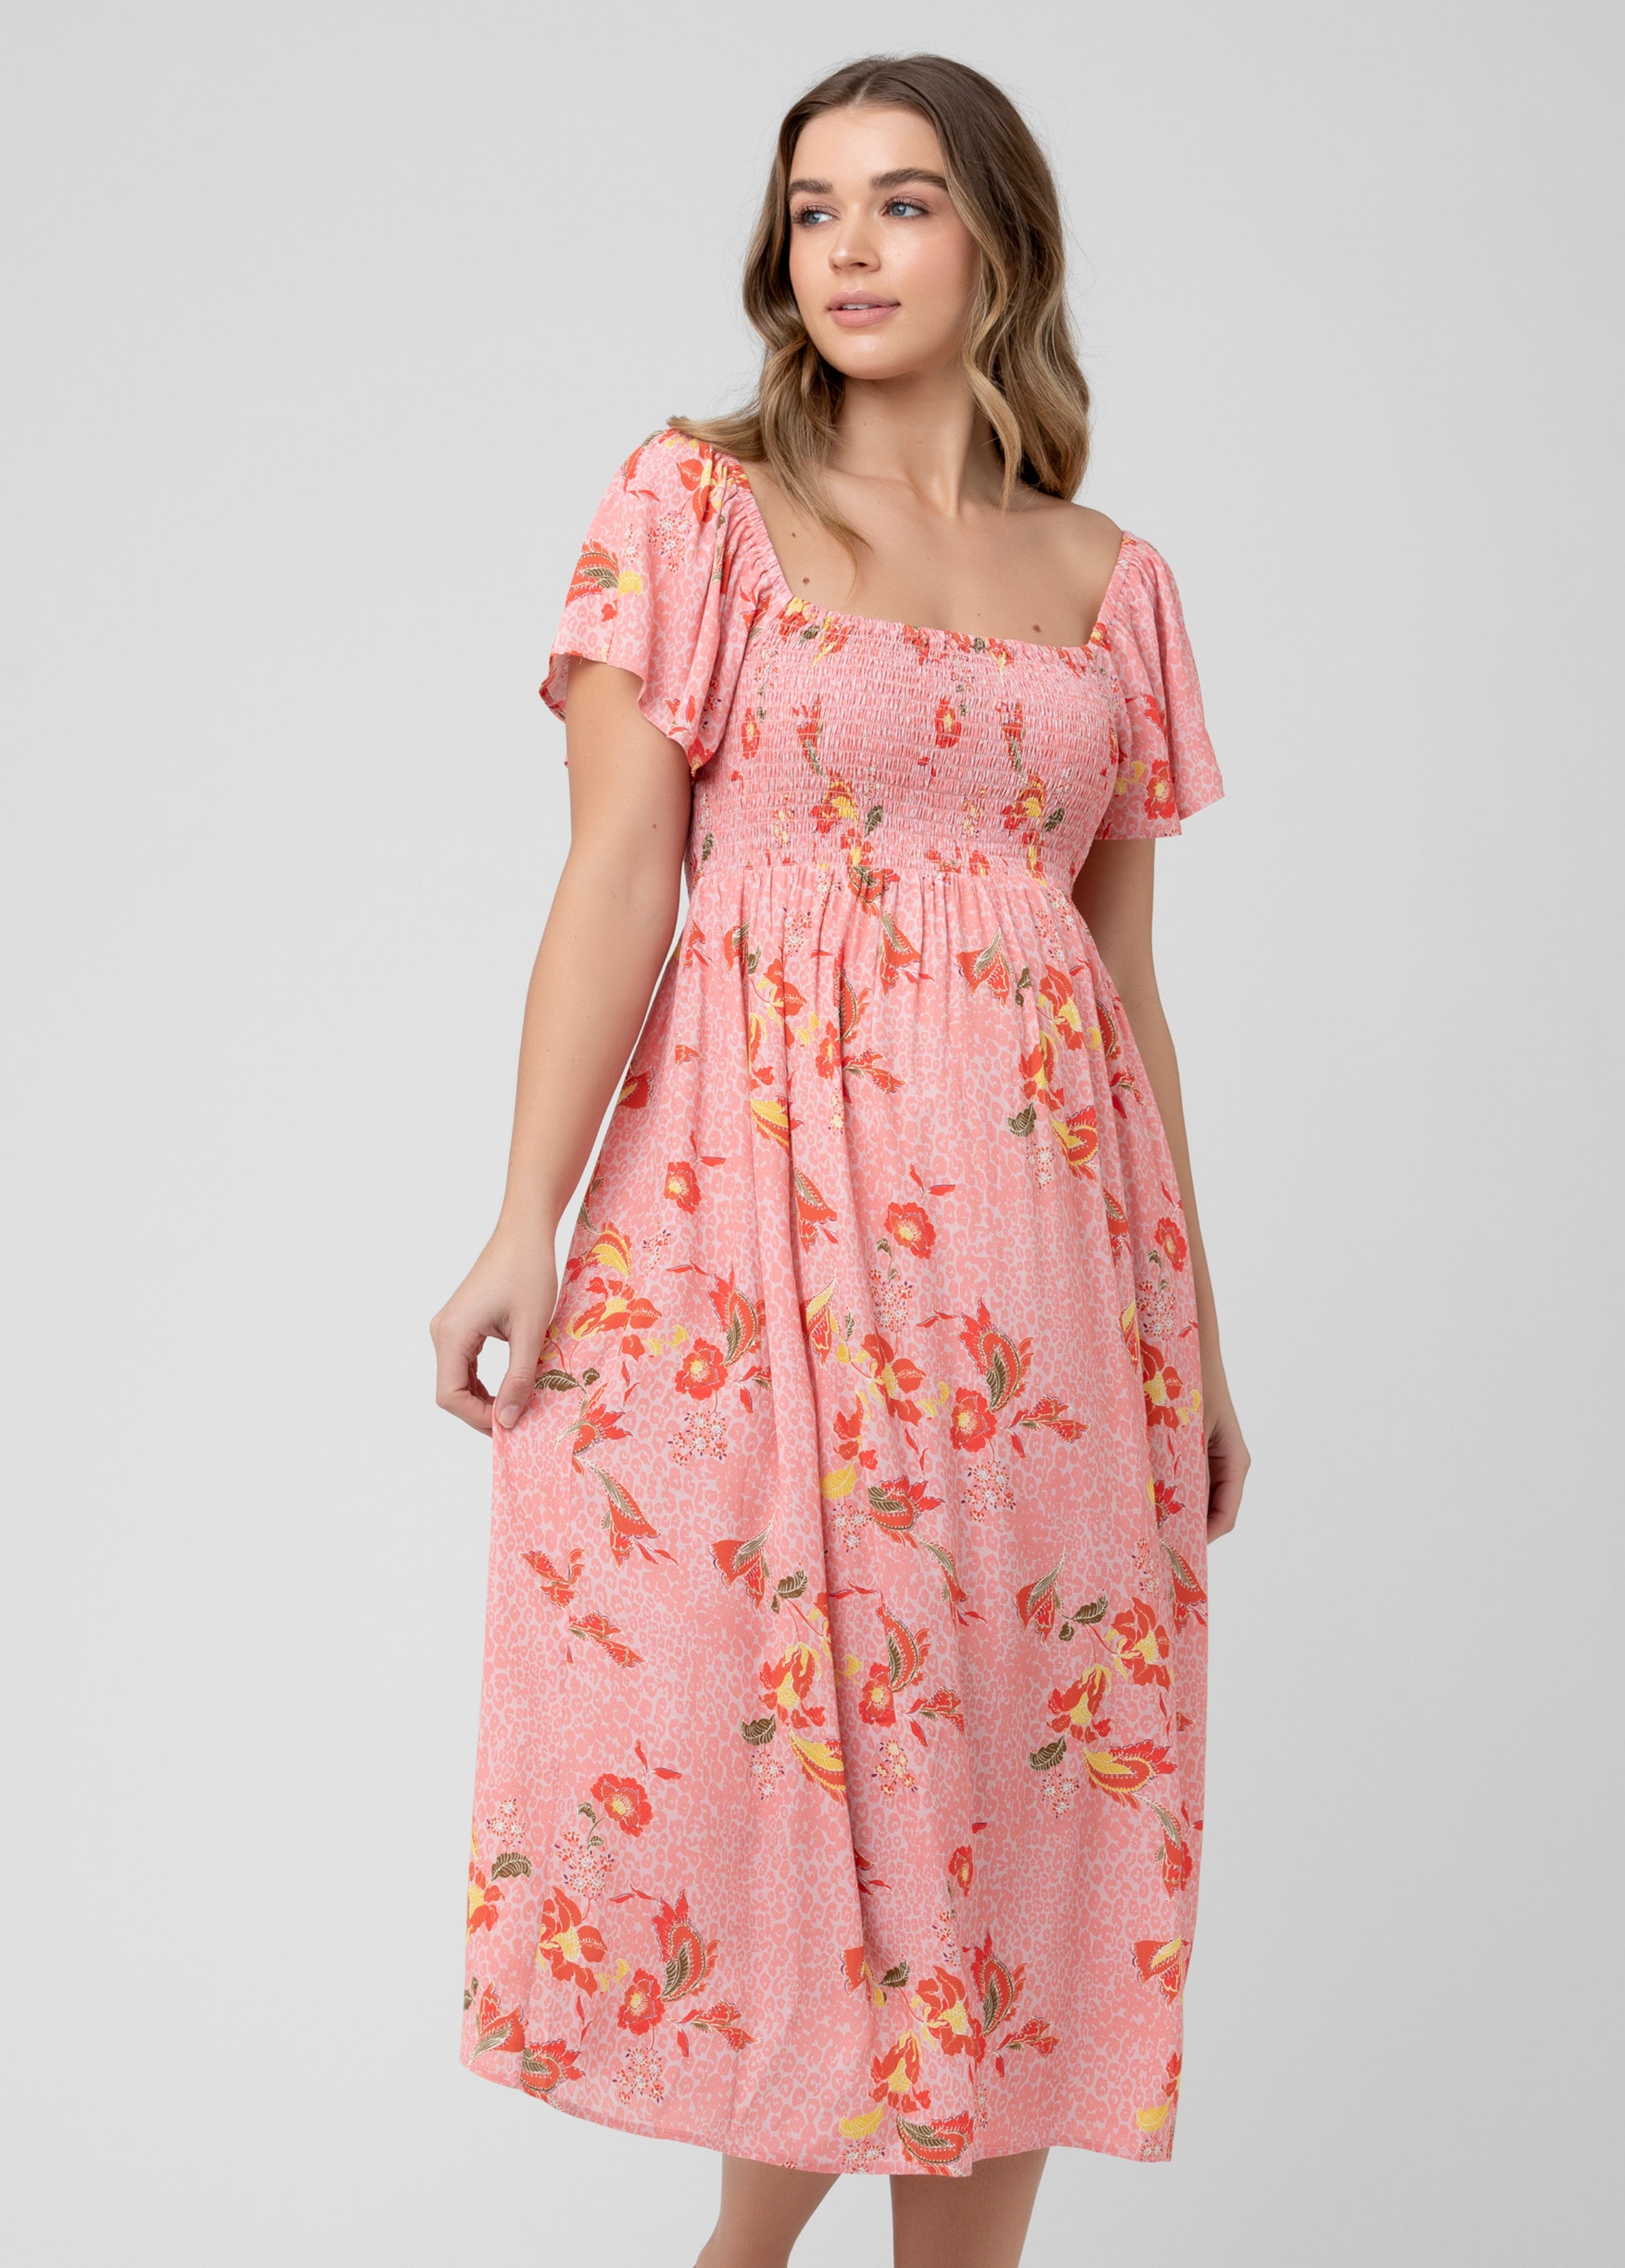 Isabel Maternity Dress Extra Small Pink Floral Pregnant Attire